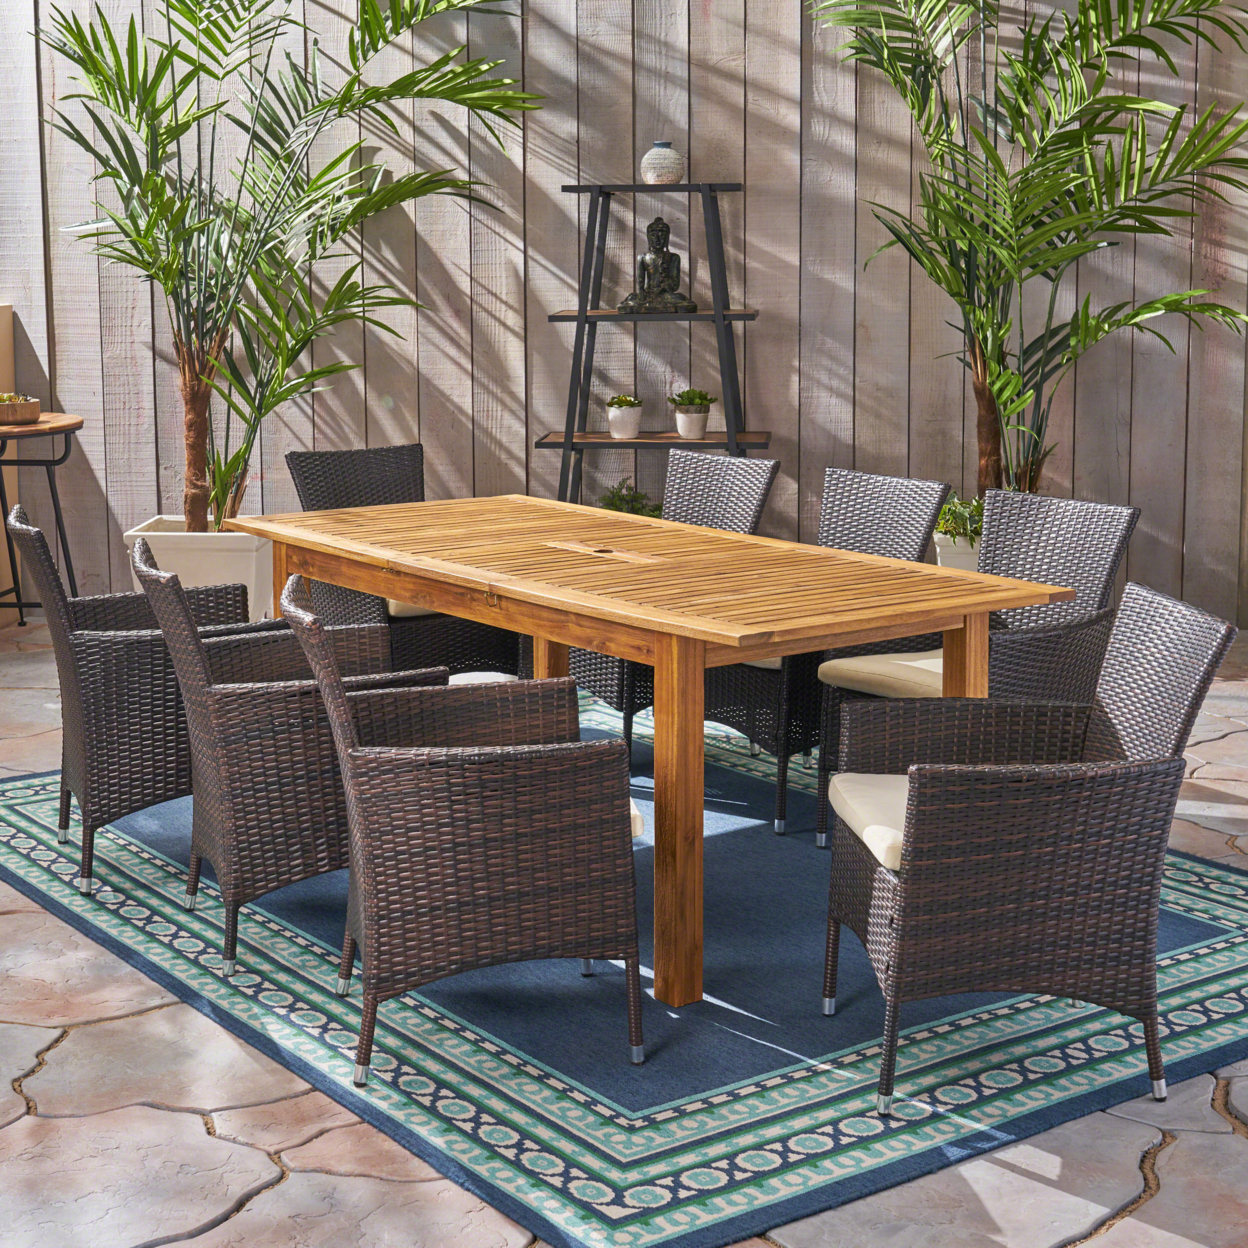 Austin Outdoor Wood And Wicker Expandable Dining Set - Natural Stained + Multi Brown + Beige, 9-Piece Set